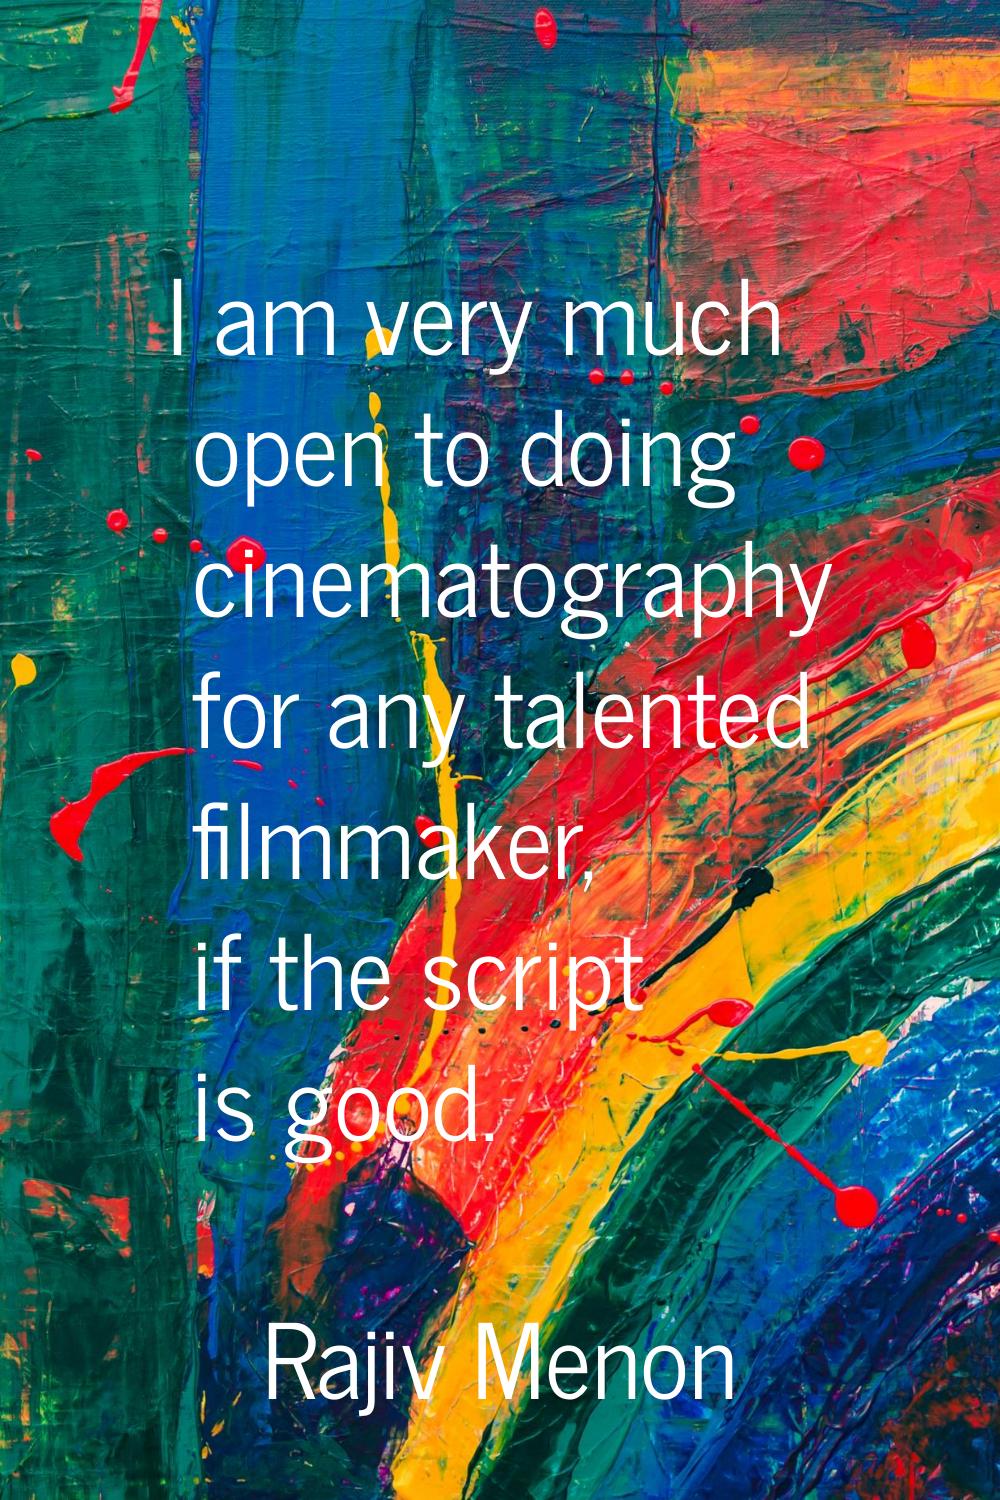 I am very much open to doing cinematography for any talented filmmaker, if the script is good.